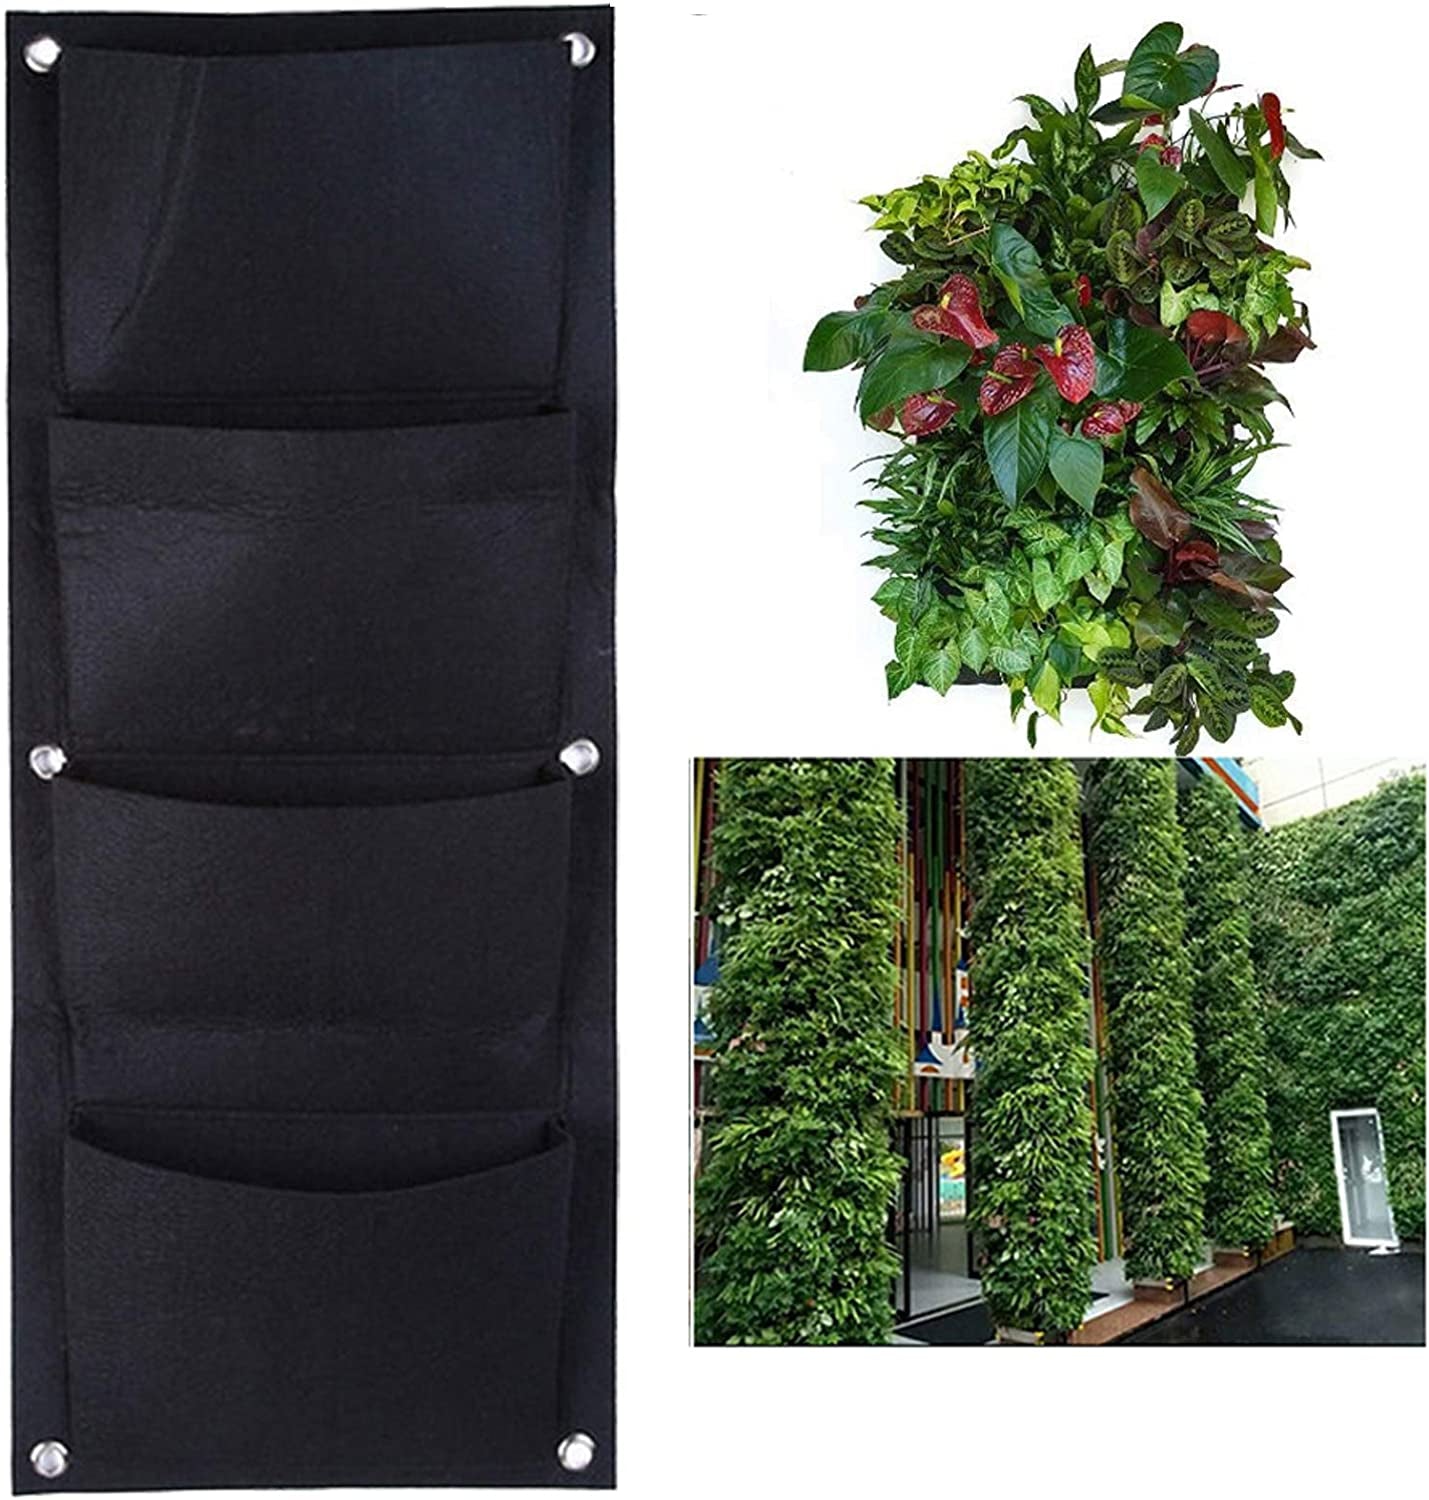 LERTREE, LERTREE 4 Pockets Garden Wall Planter Vertical Flower Plants Hanging Planting Growing Bag Pot Container 11.8 X 39.4 Inch